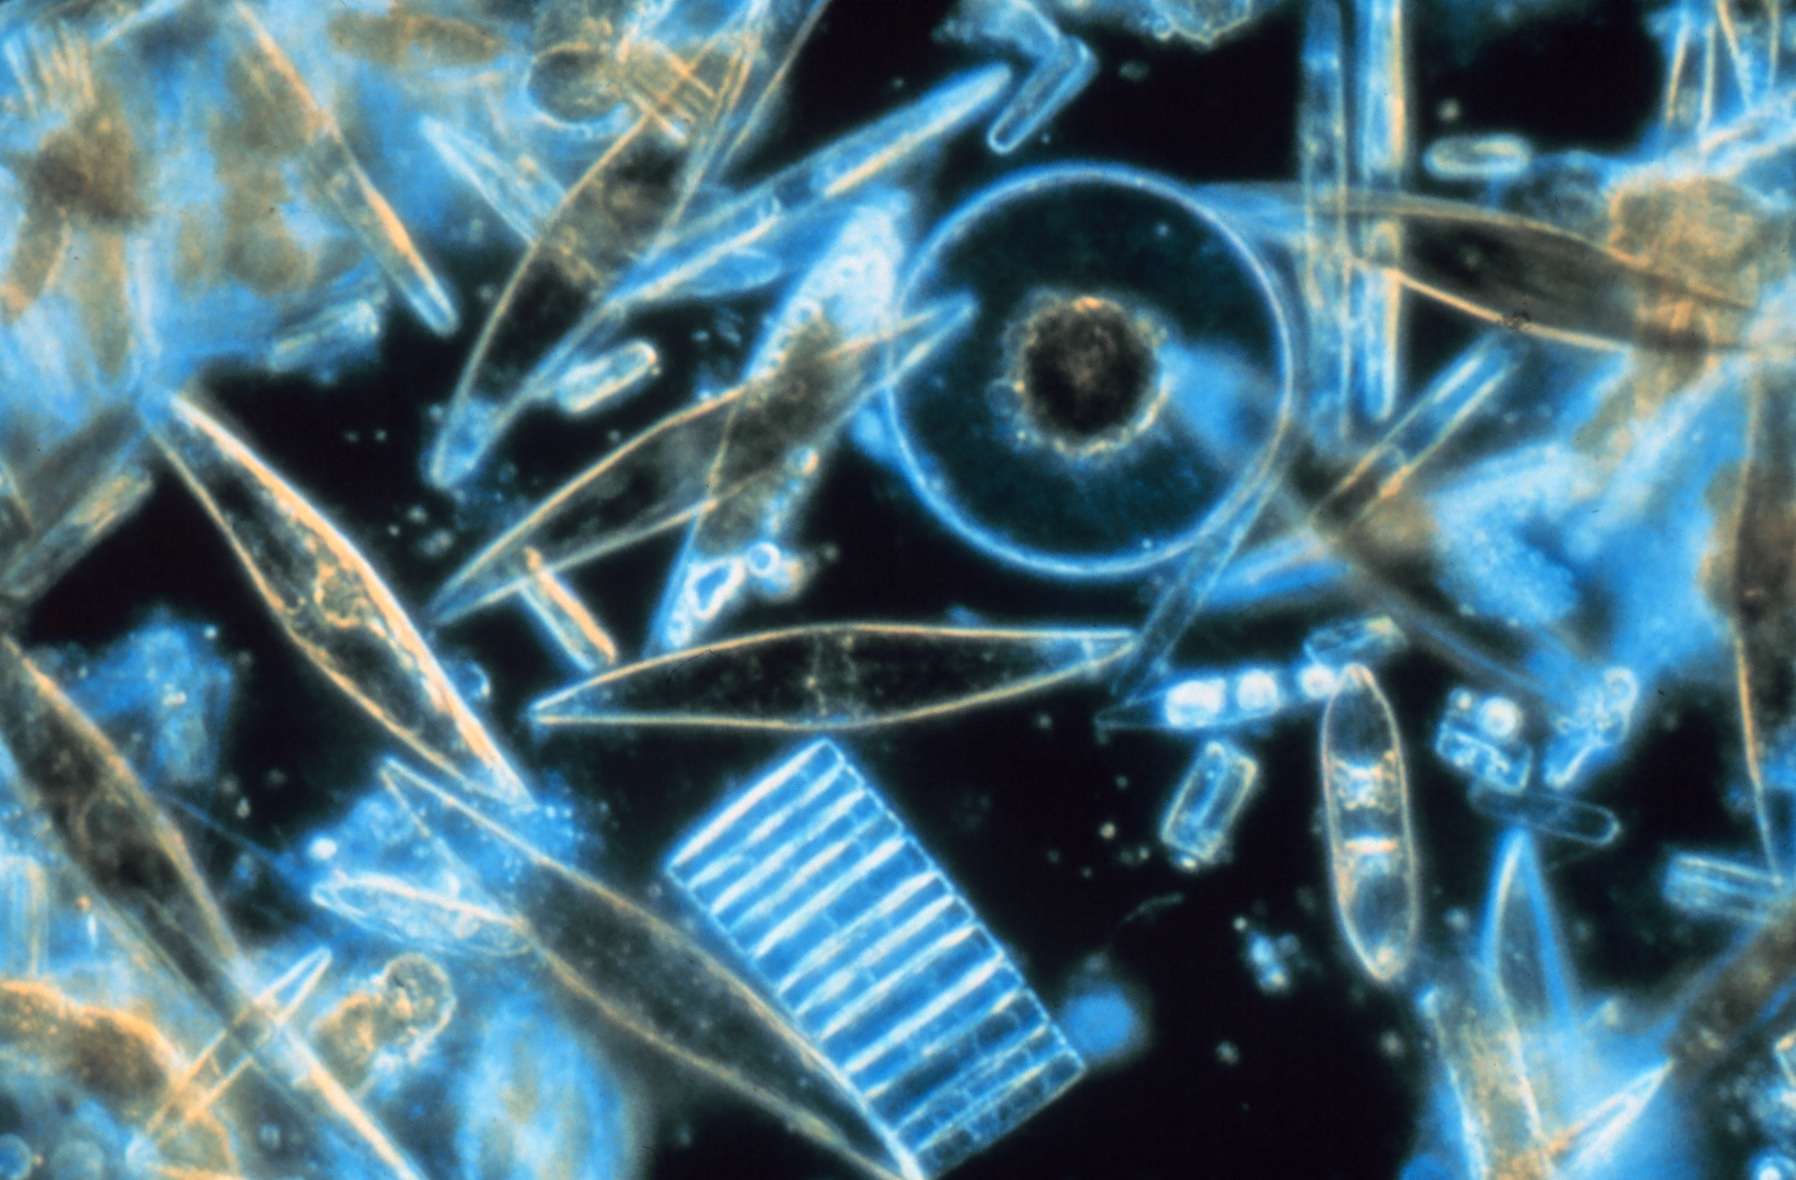 Assorted diatoms as seen through a microscope. These specimens were living between crystals of annual sea ice in McMurdo Sound, Antarctica.